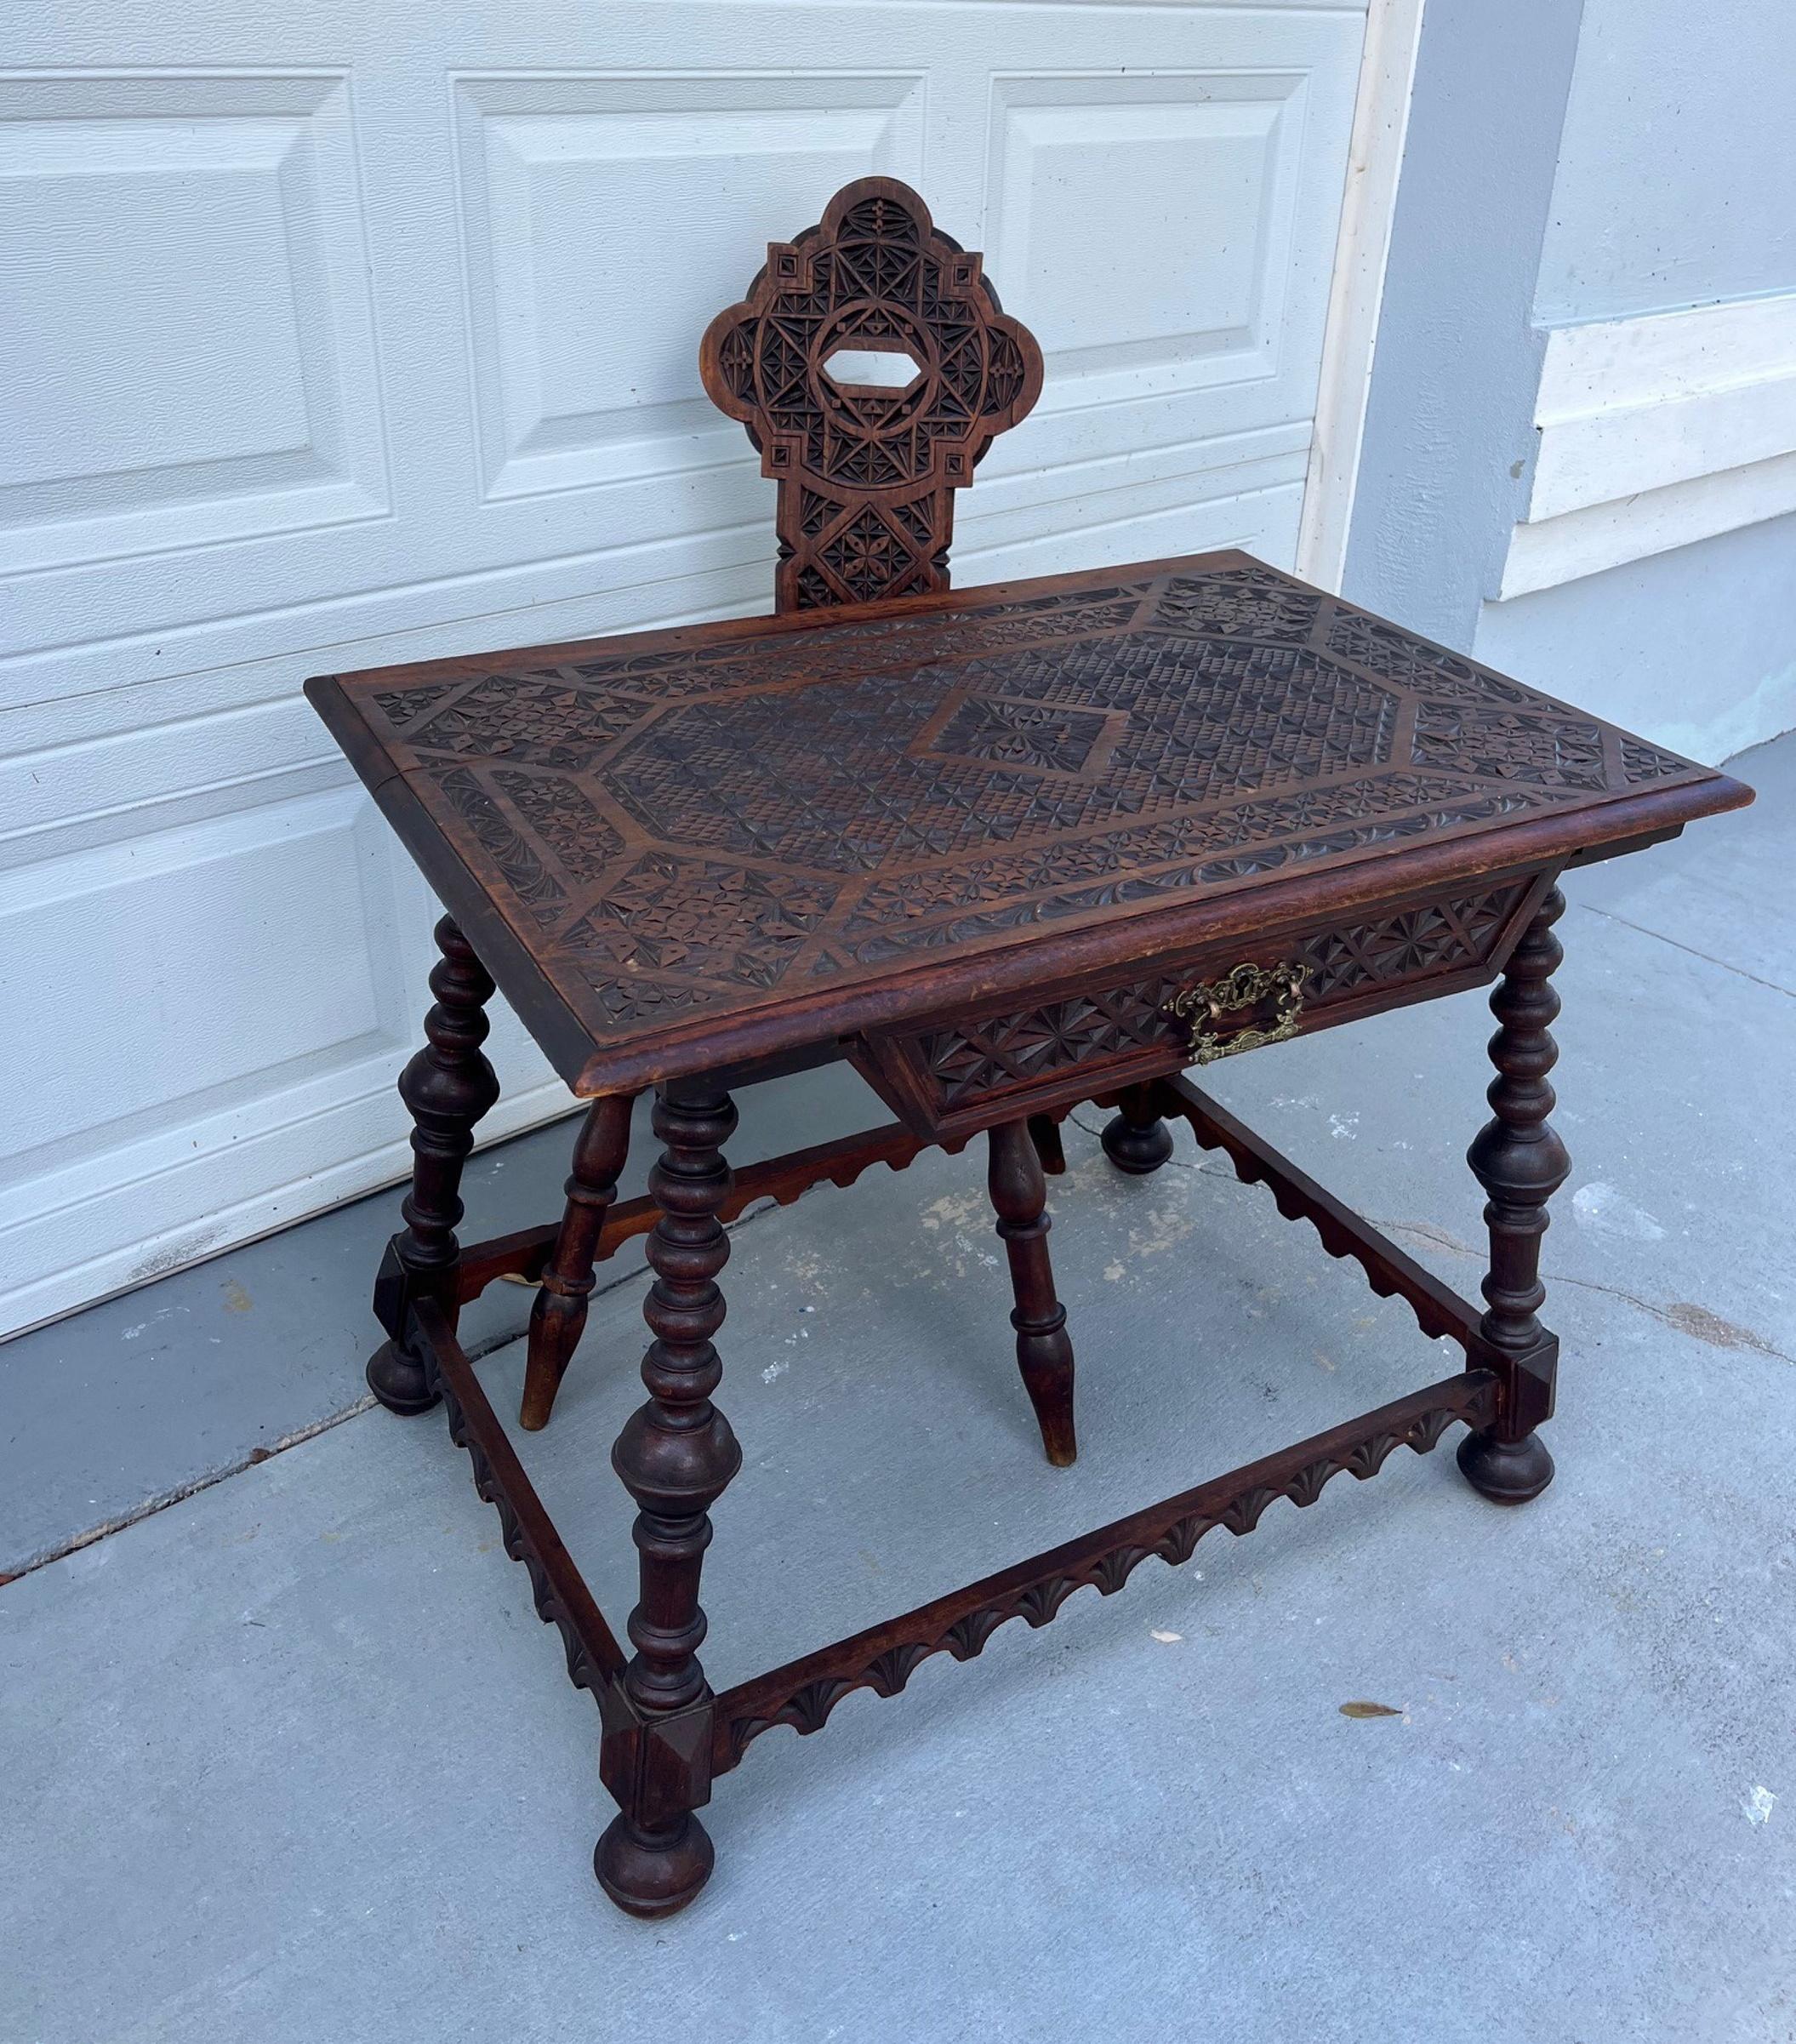 19th Century German Black Forest Chip-Carved Suite Desk with Drawer and Chair For Sale 12